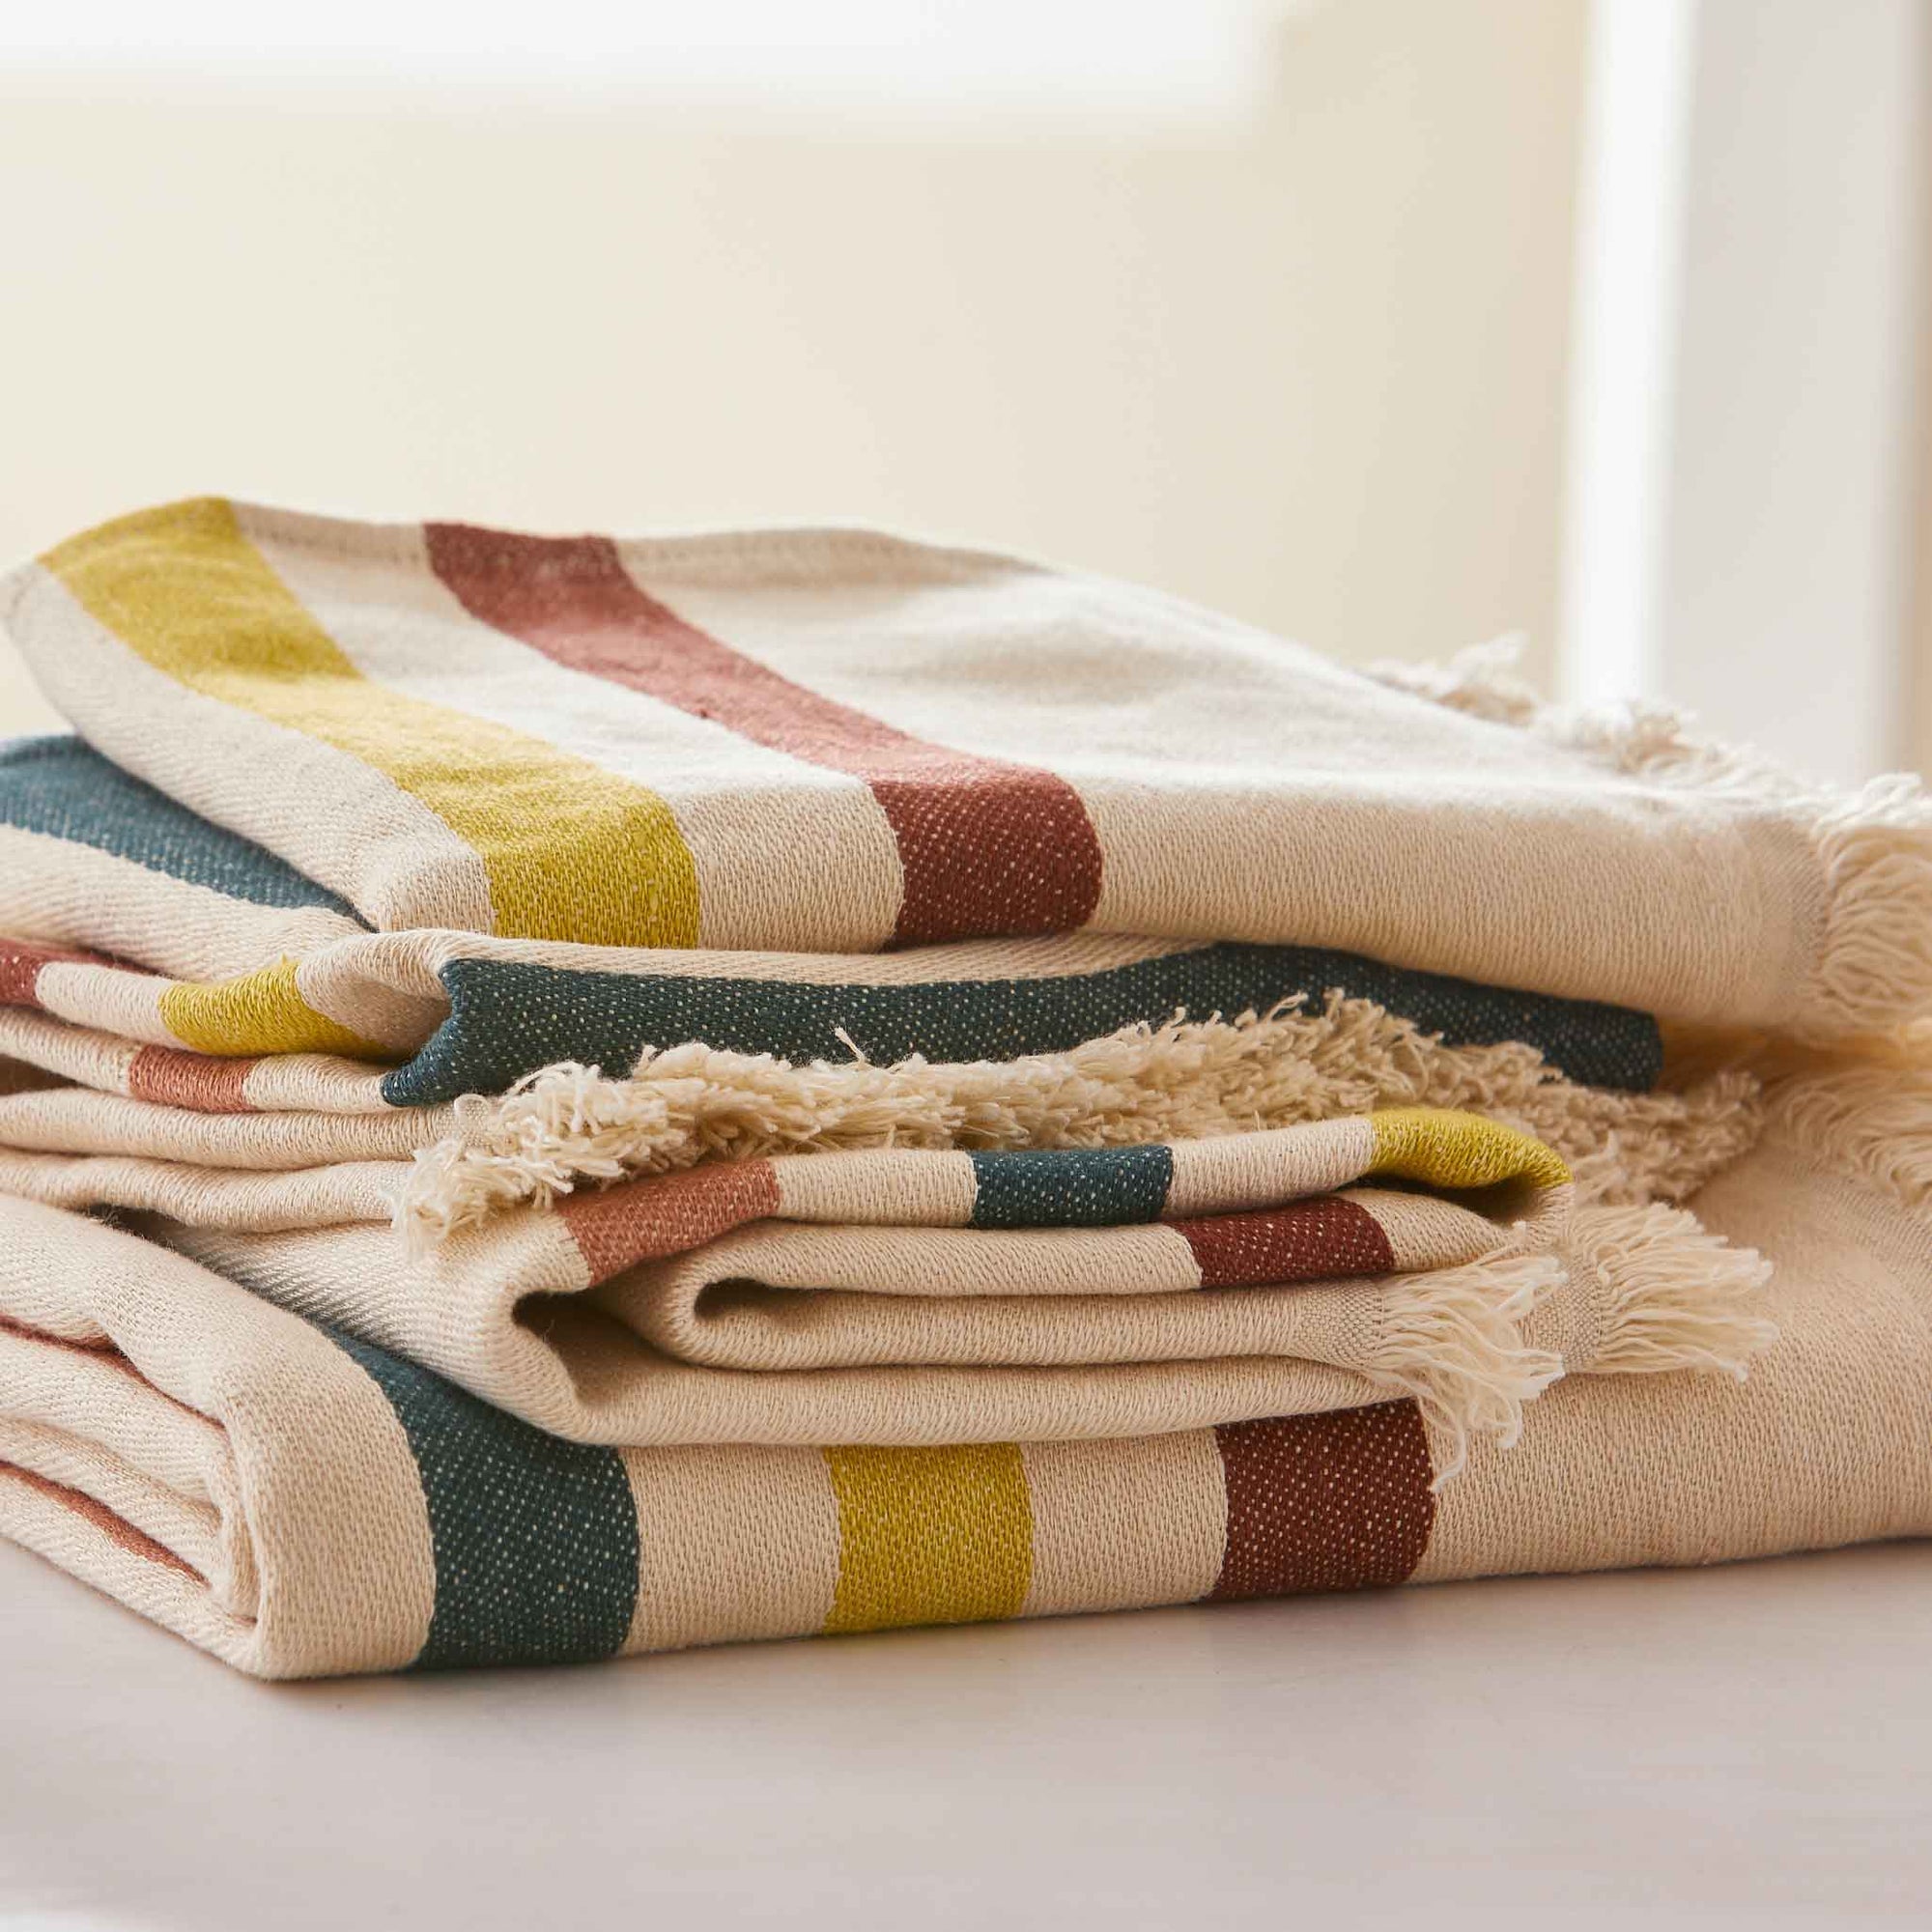 HANDWOVEN GIANT WAFFLE TOWELS-WHITE with GREY STRIPES - Privet